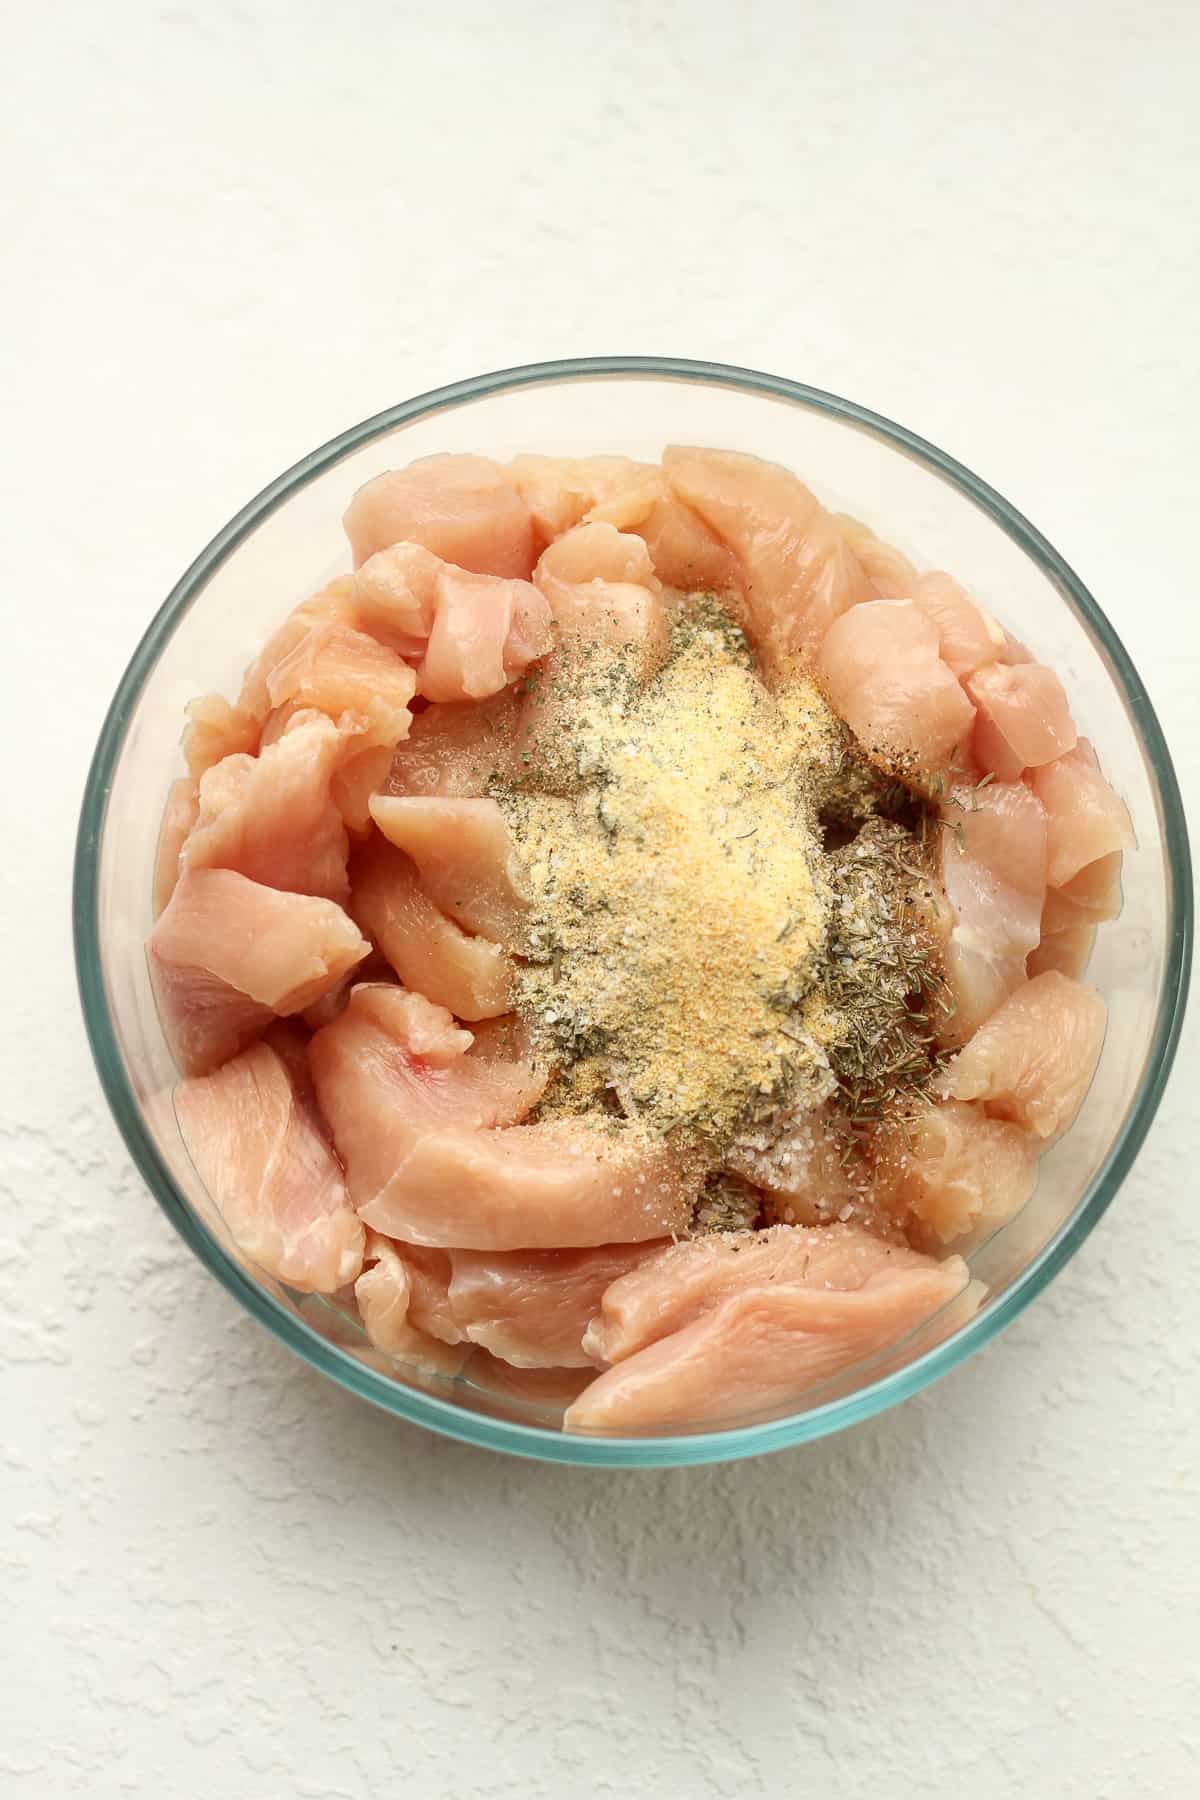 A bowl of the sliced chicken with seasonings on top.